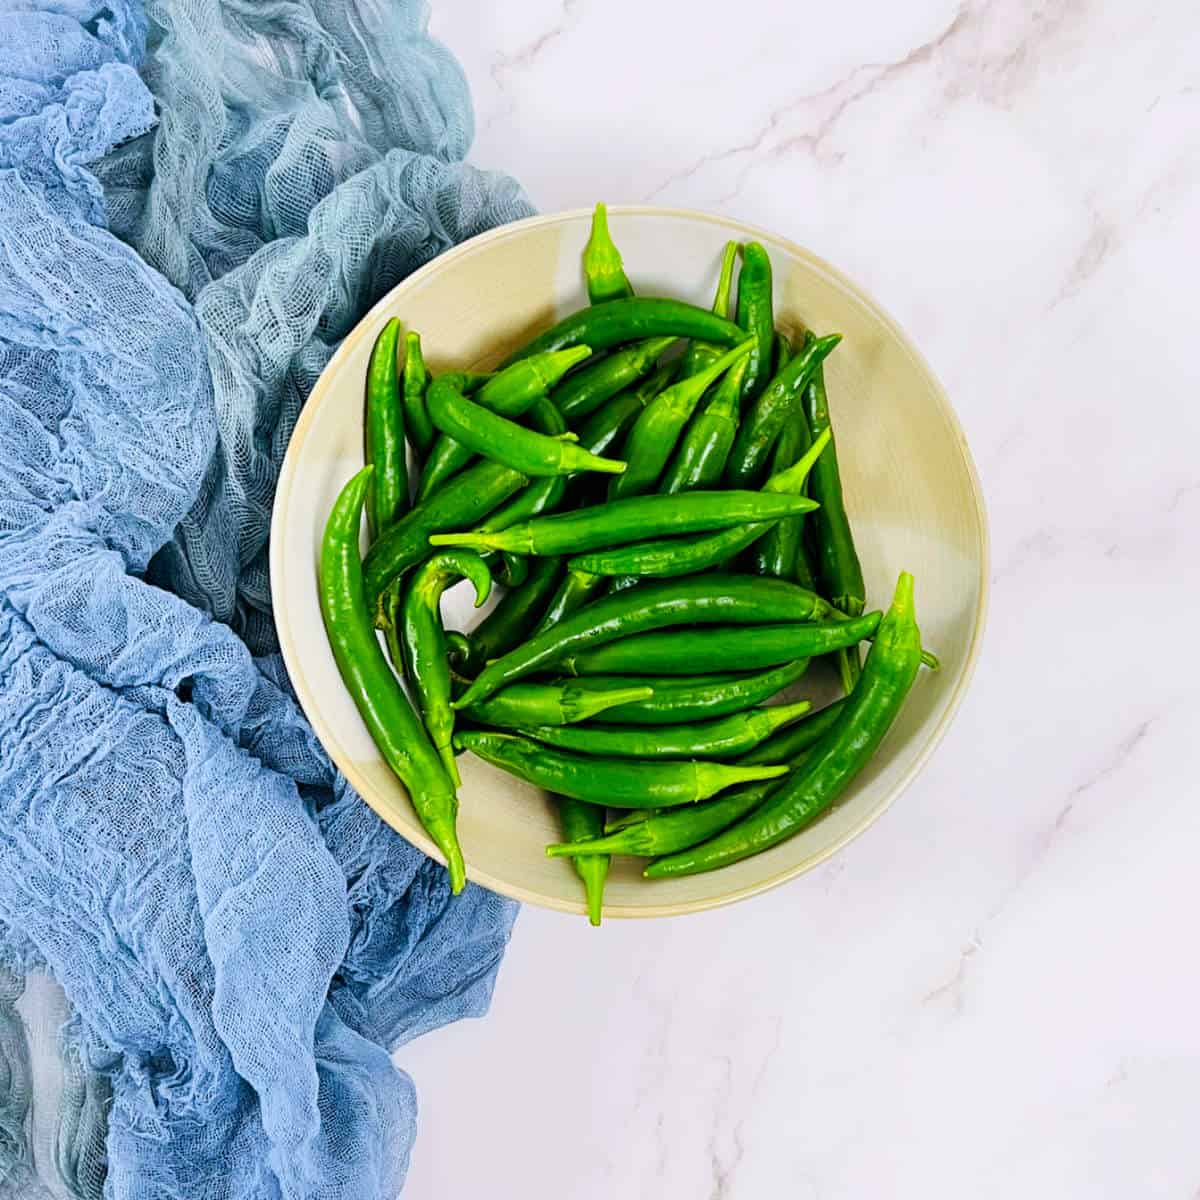 Fresh green chilies - how to store them.